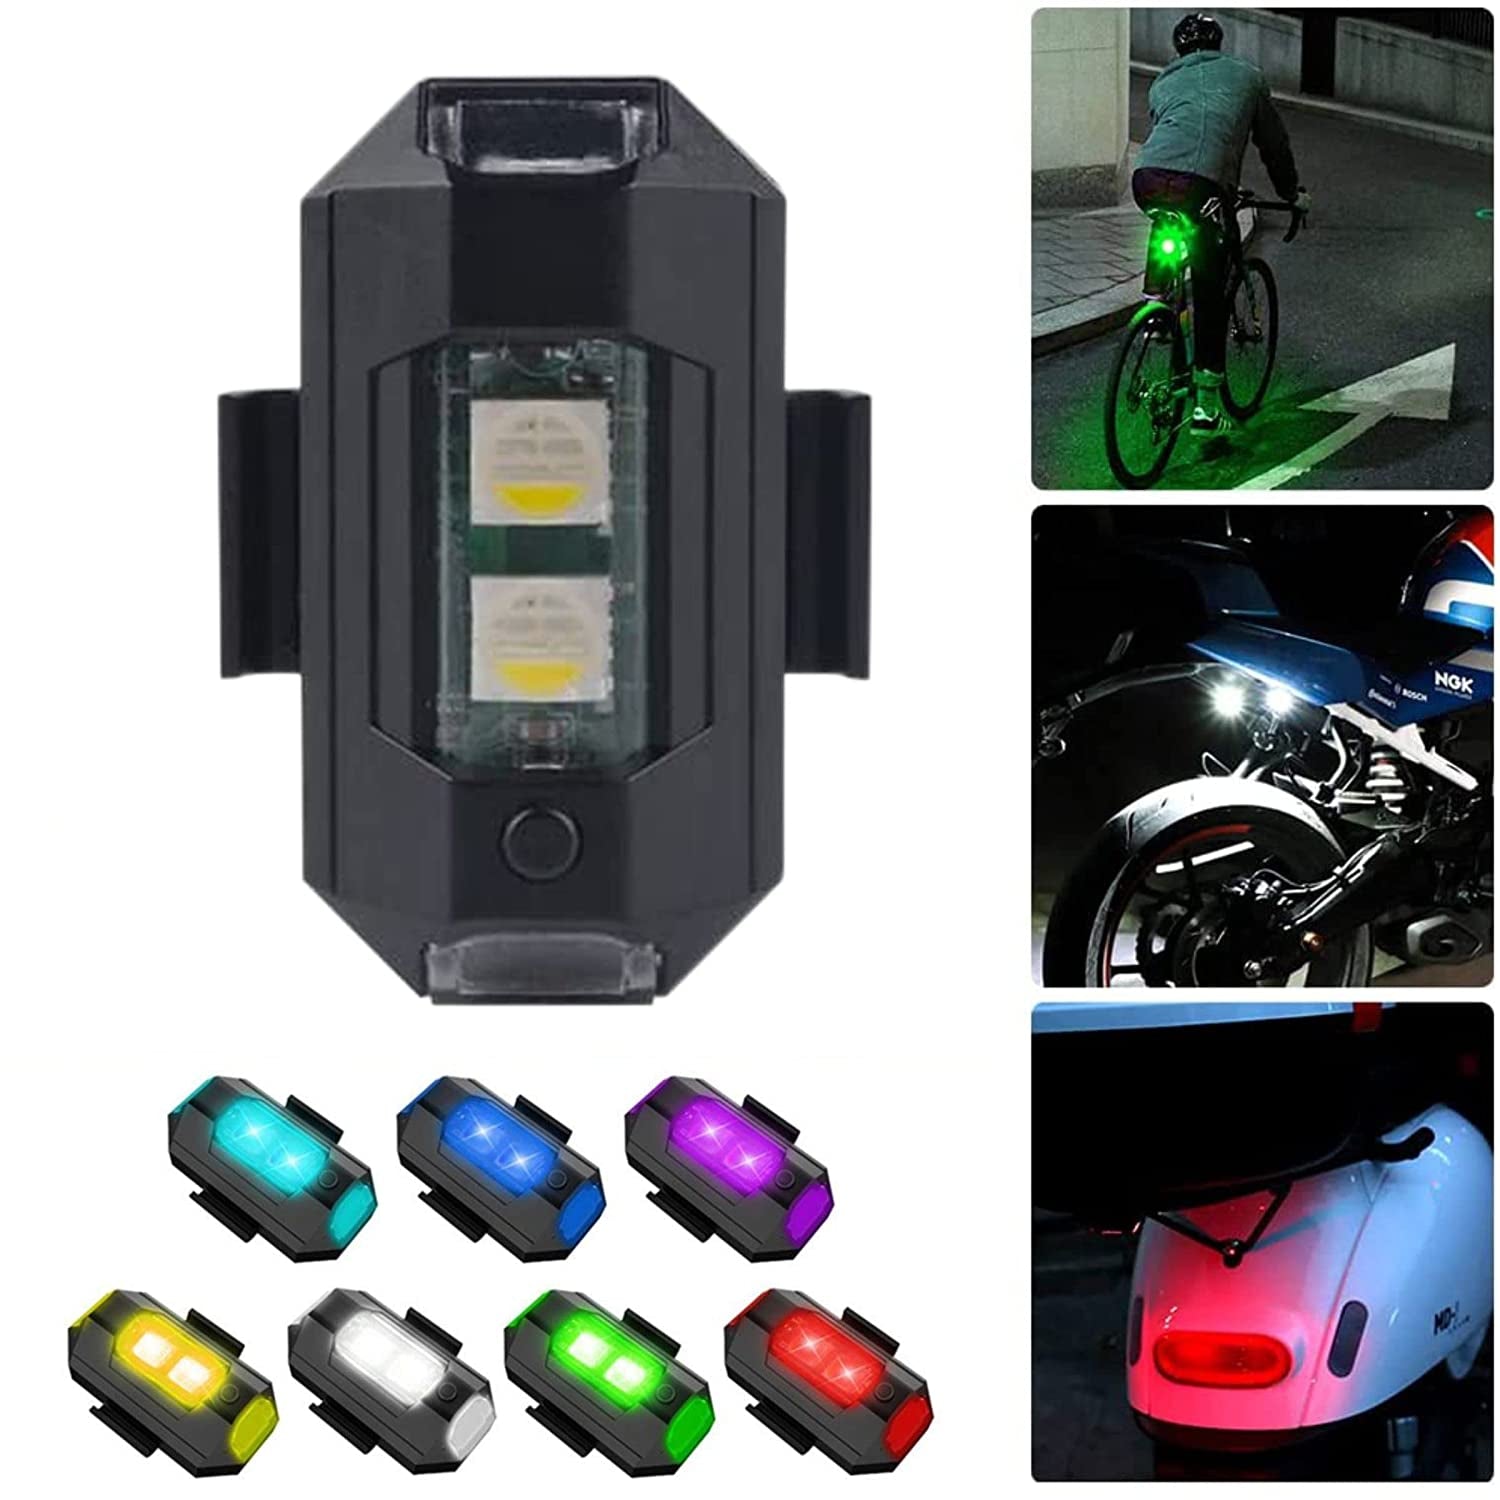 LED Aircraft Strobe warning Accessories Lights 7 Colors Exterior Lights Kit For helmet Motorbike, Drone, Bicycle USB Rechargeable Battery (one piece)